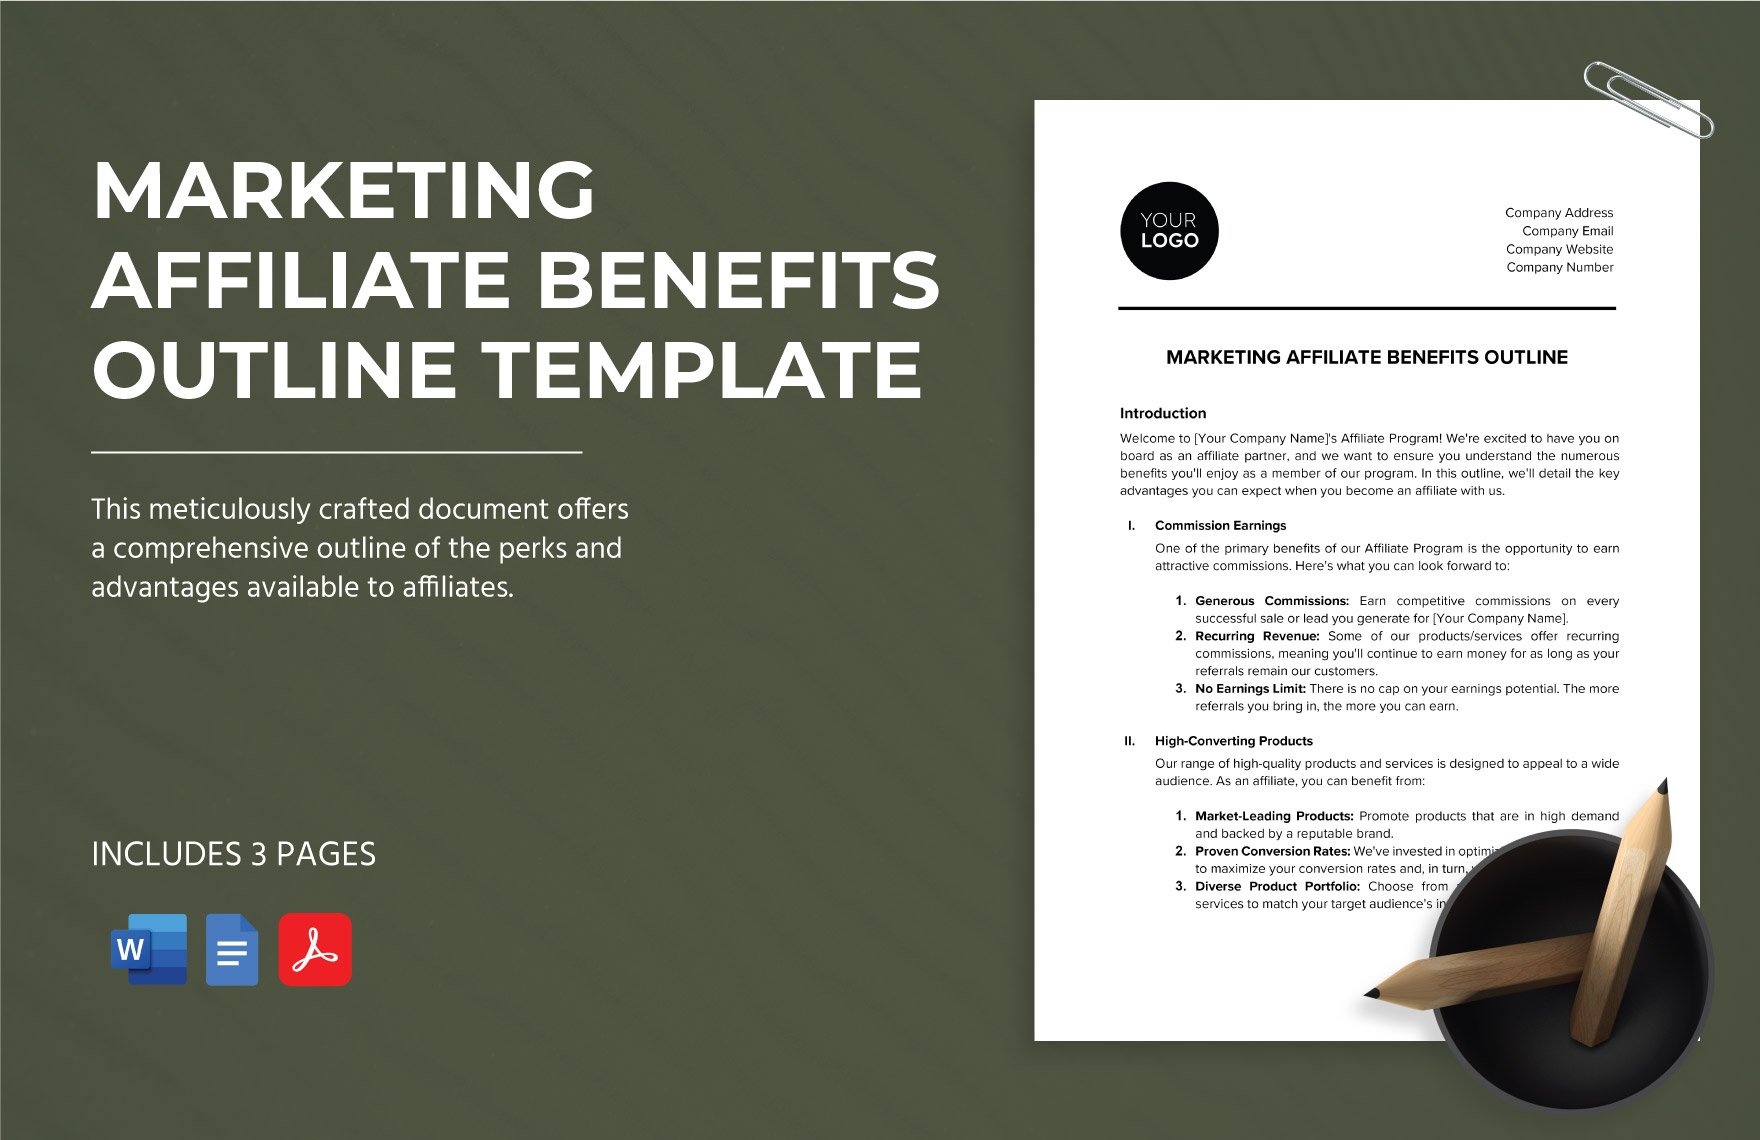 Marketing Affiliate Benefits Outline Template in Word, Google Docs, PDF